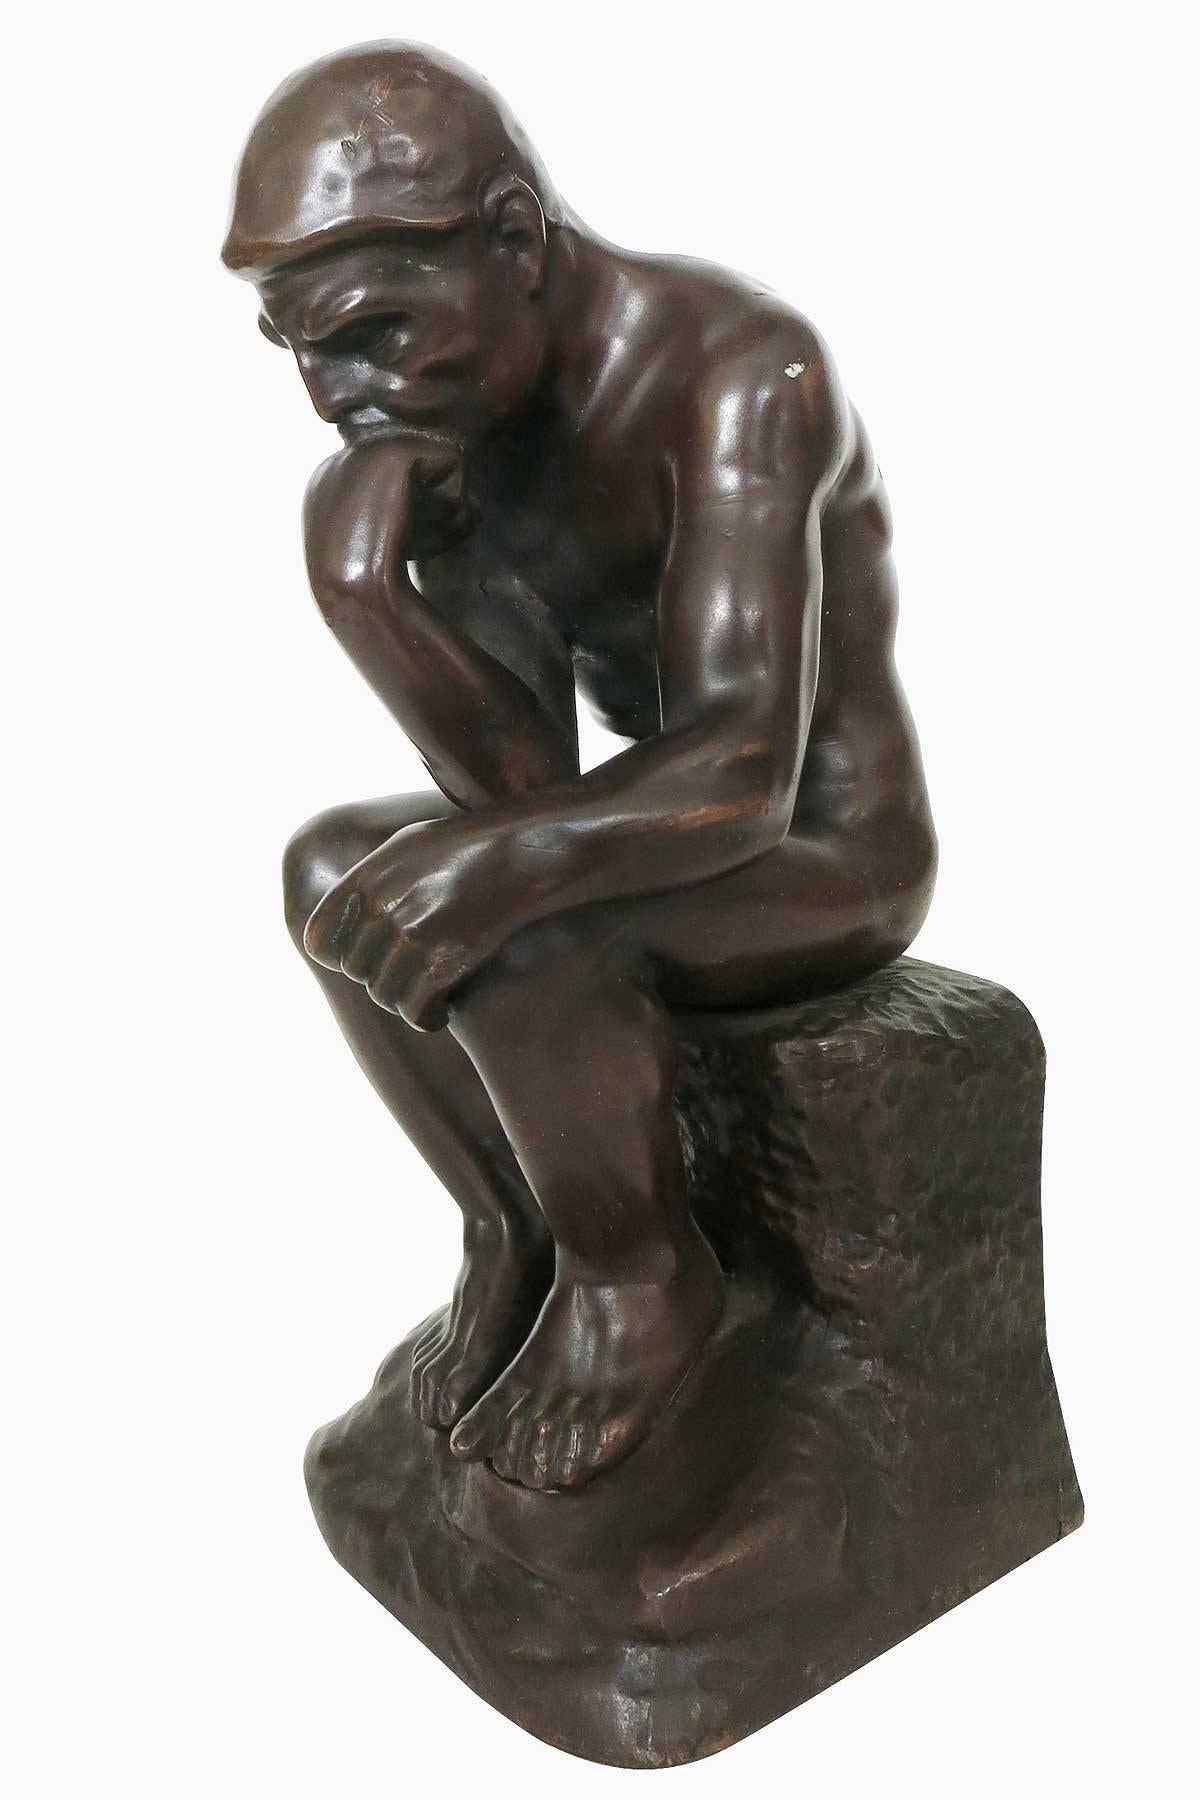 Art Deco 'The Thinker' Bookends Statues by Jennings Brothers